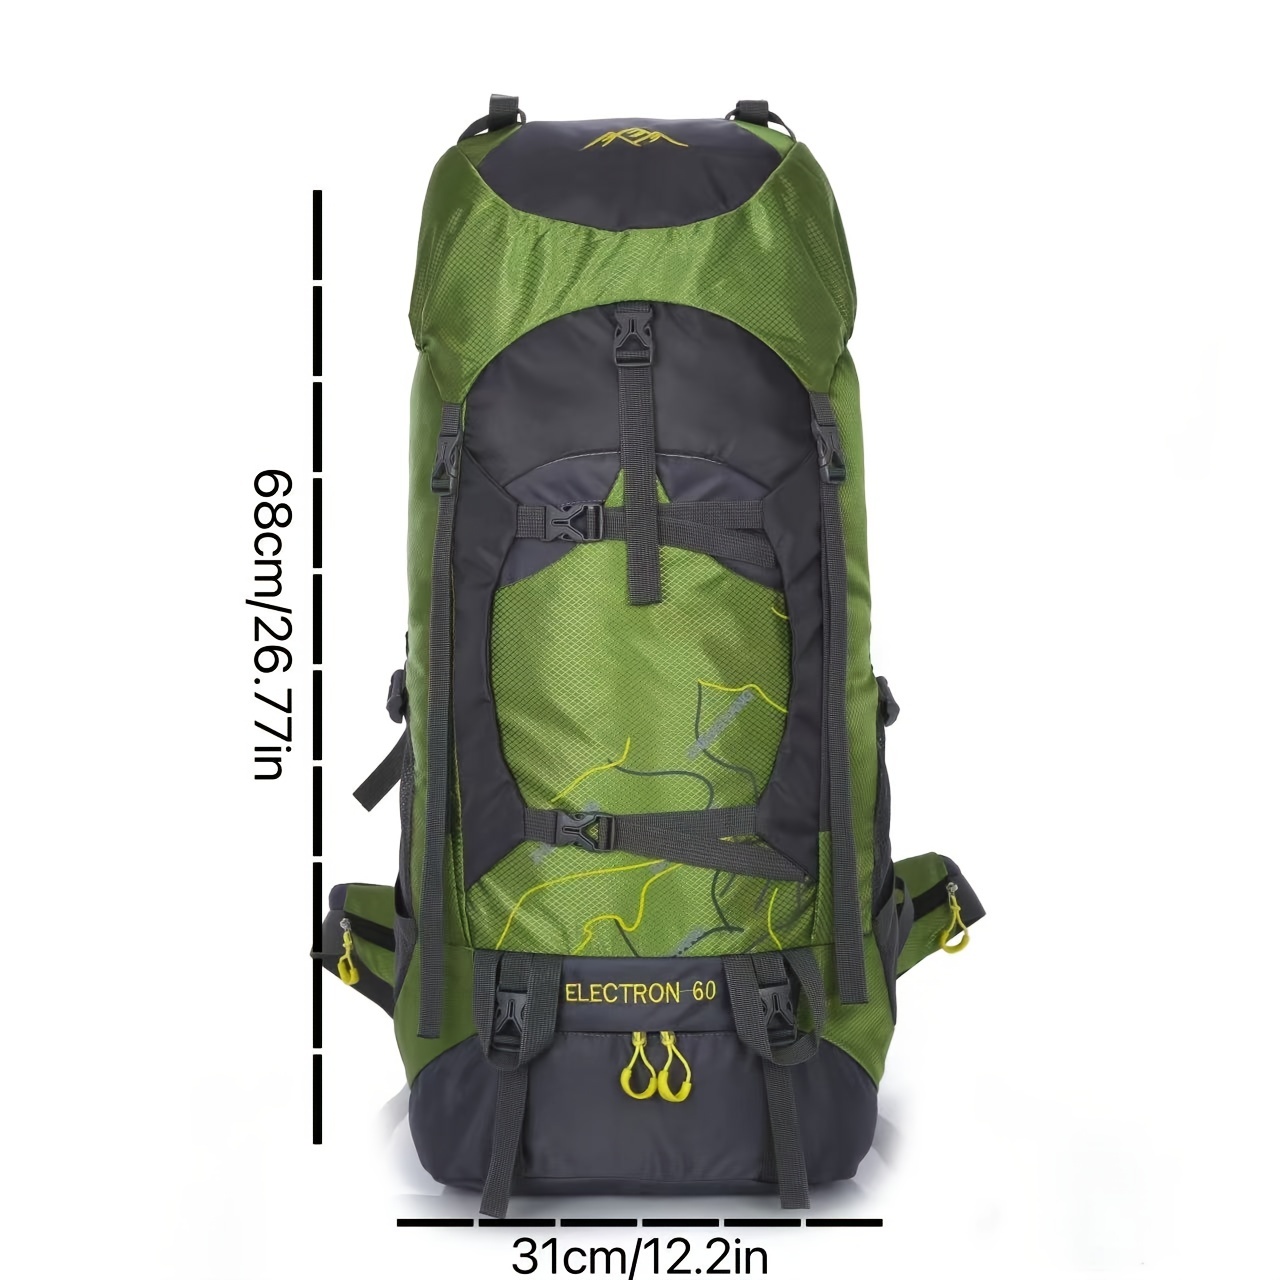 75L Nylon Waterproof Climbing Hiking Backpack with Rain Cover in  Green/Black/Red/Blue